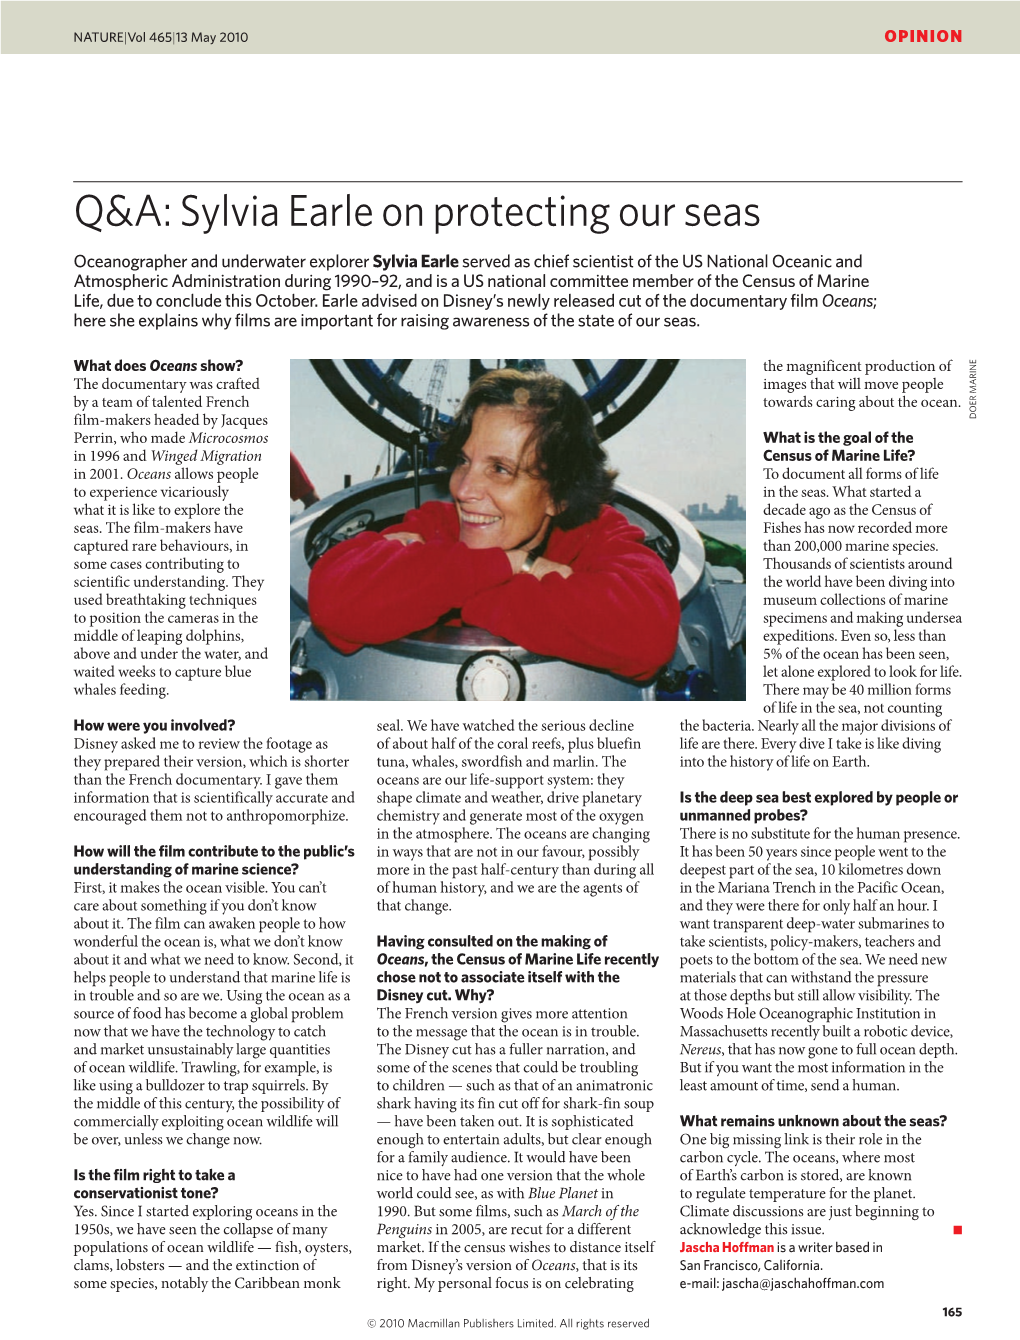 Sylvia Earle on Protecting Our Seas